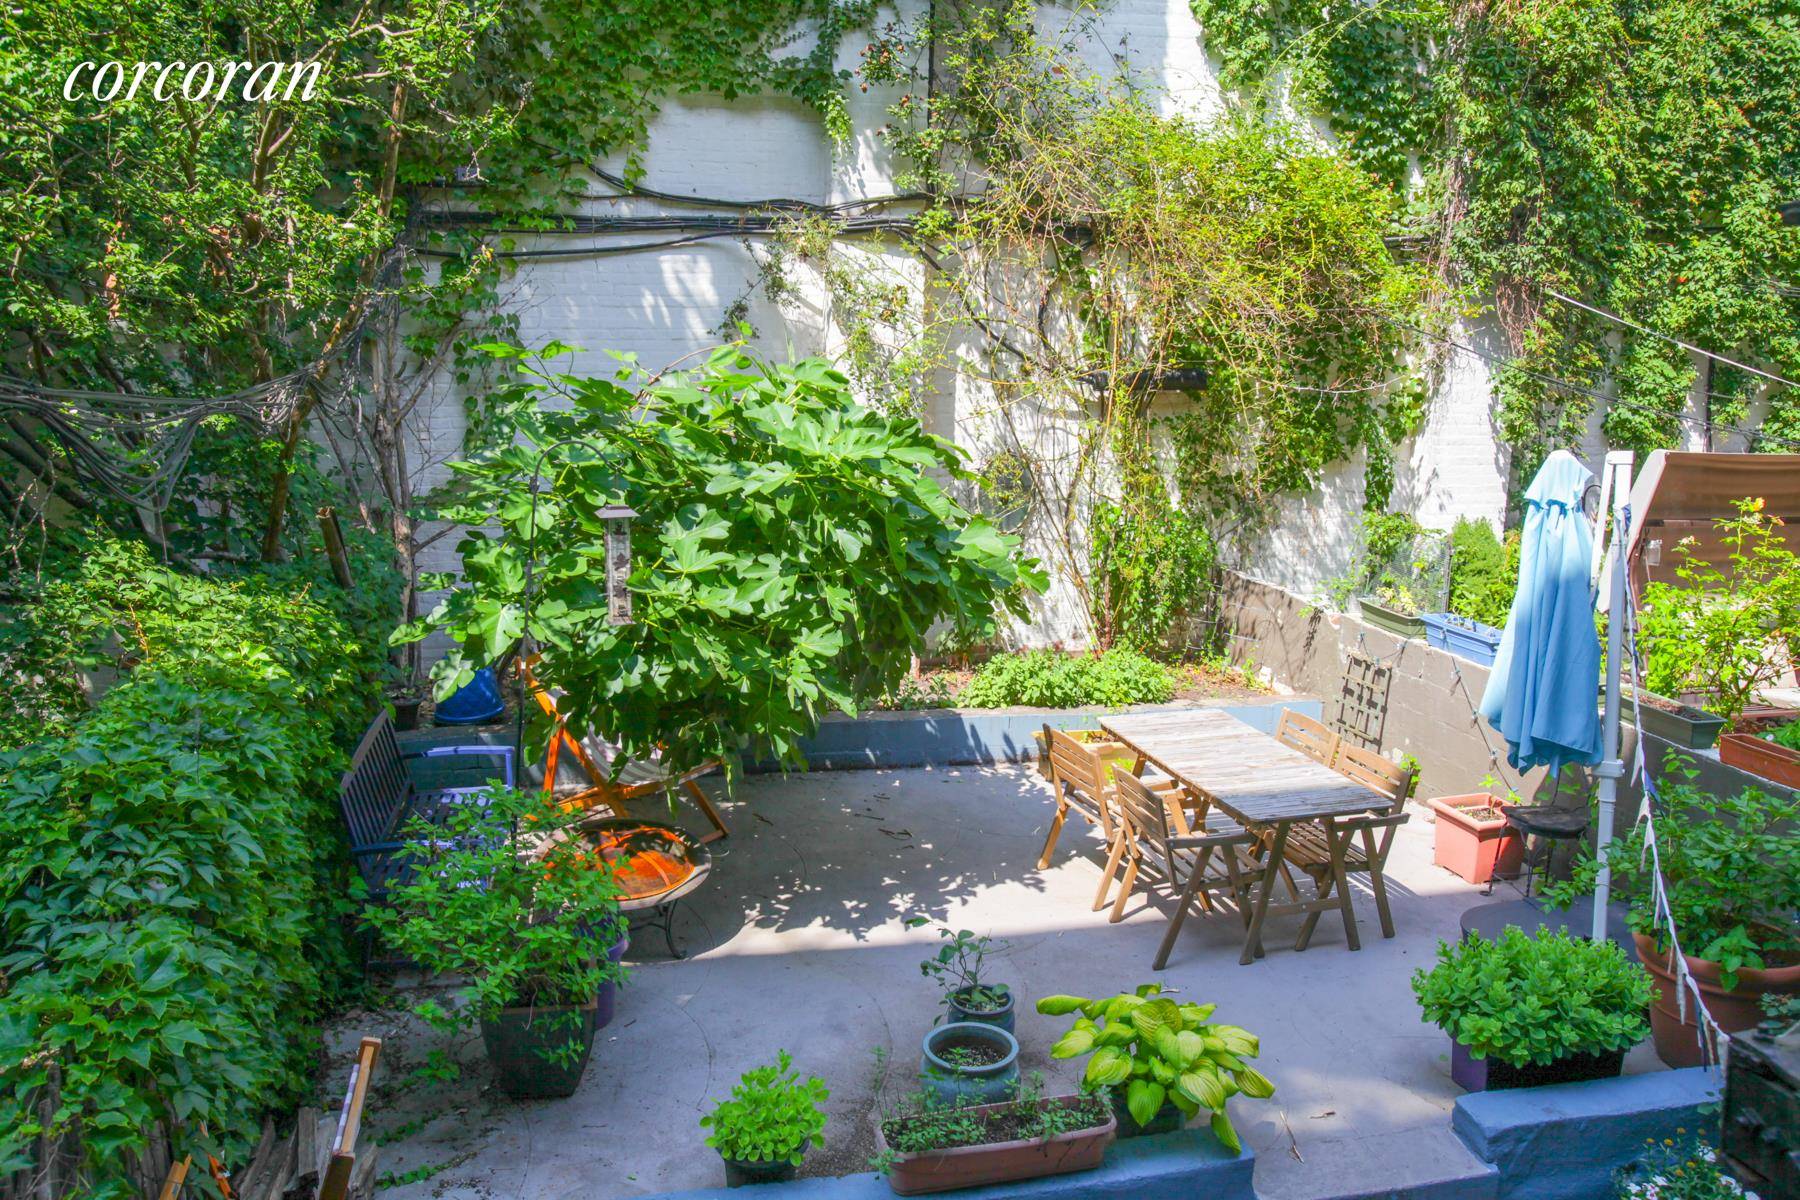 This 20X42 three family townhouse exemplifies Carroll Garden living with its generous front yard gt ; This big solid building sits between Smith St.